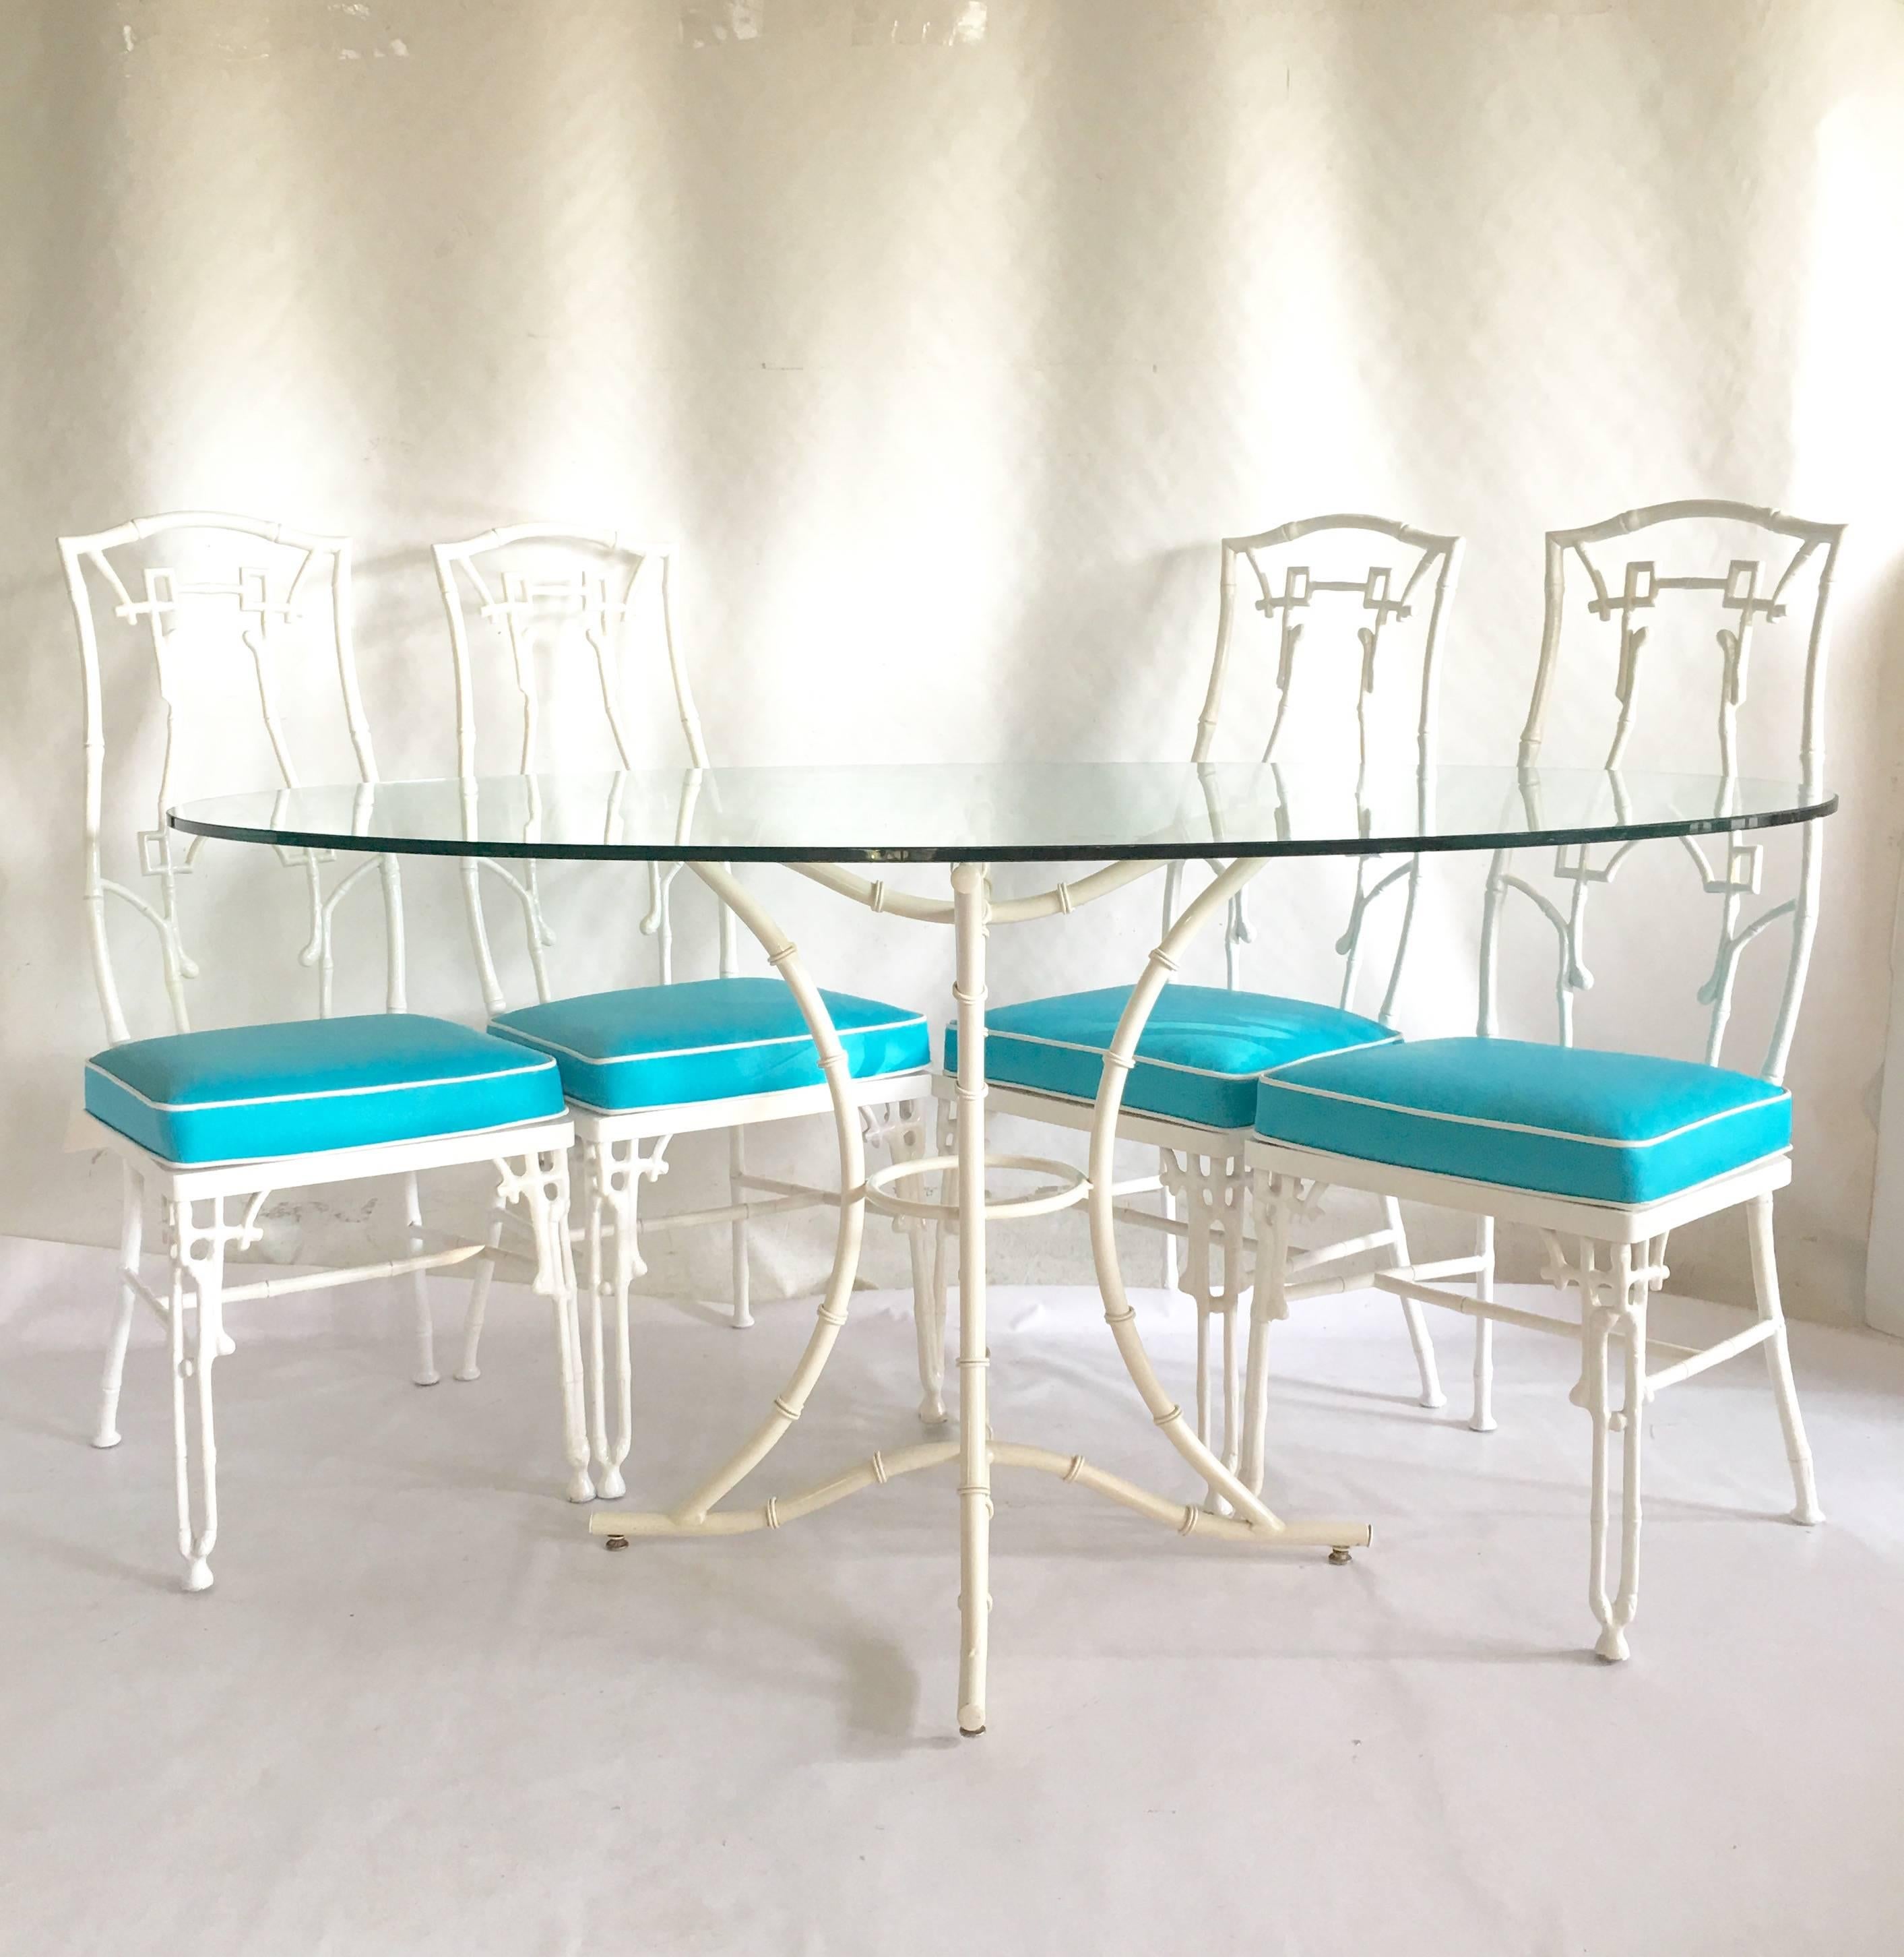 Hollywood Regency six-piece faux bamboo chairs and table. Newly upholstered seats in bright aqua marine vinyl with a bright white vinyl welt. Oval 1/4 inch thick glass top. Chairs measure, 36.5 in height and 18.5 deep. Seat height is 18